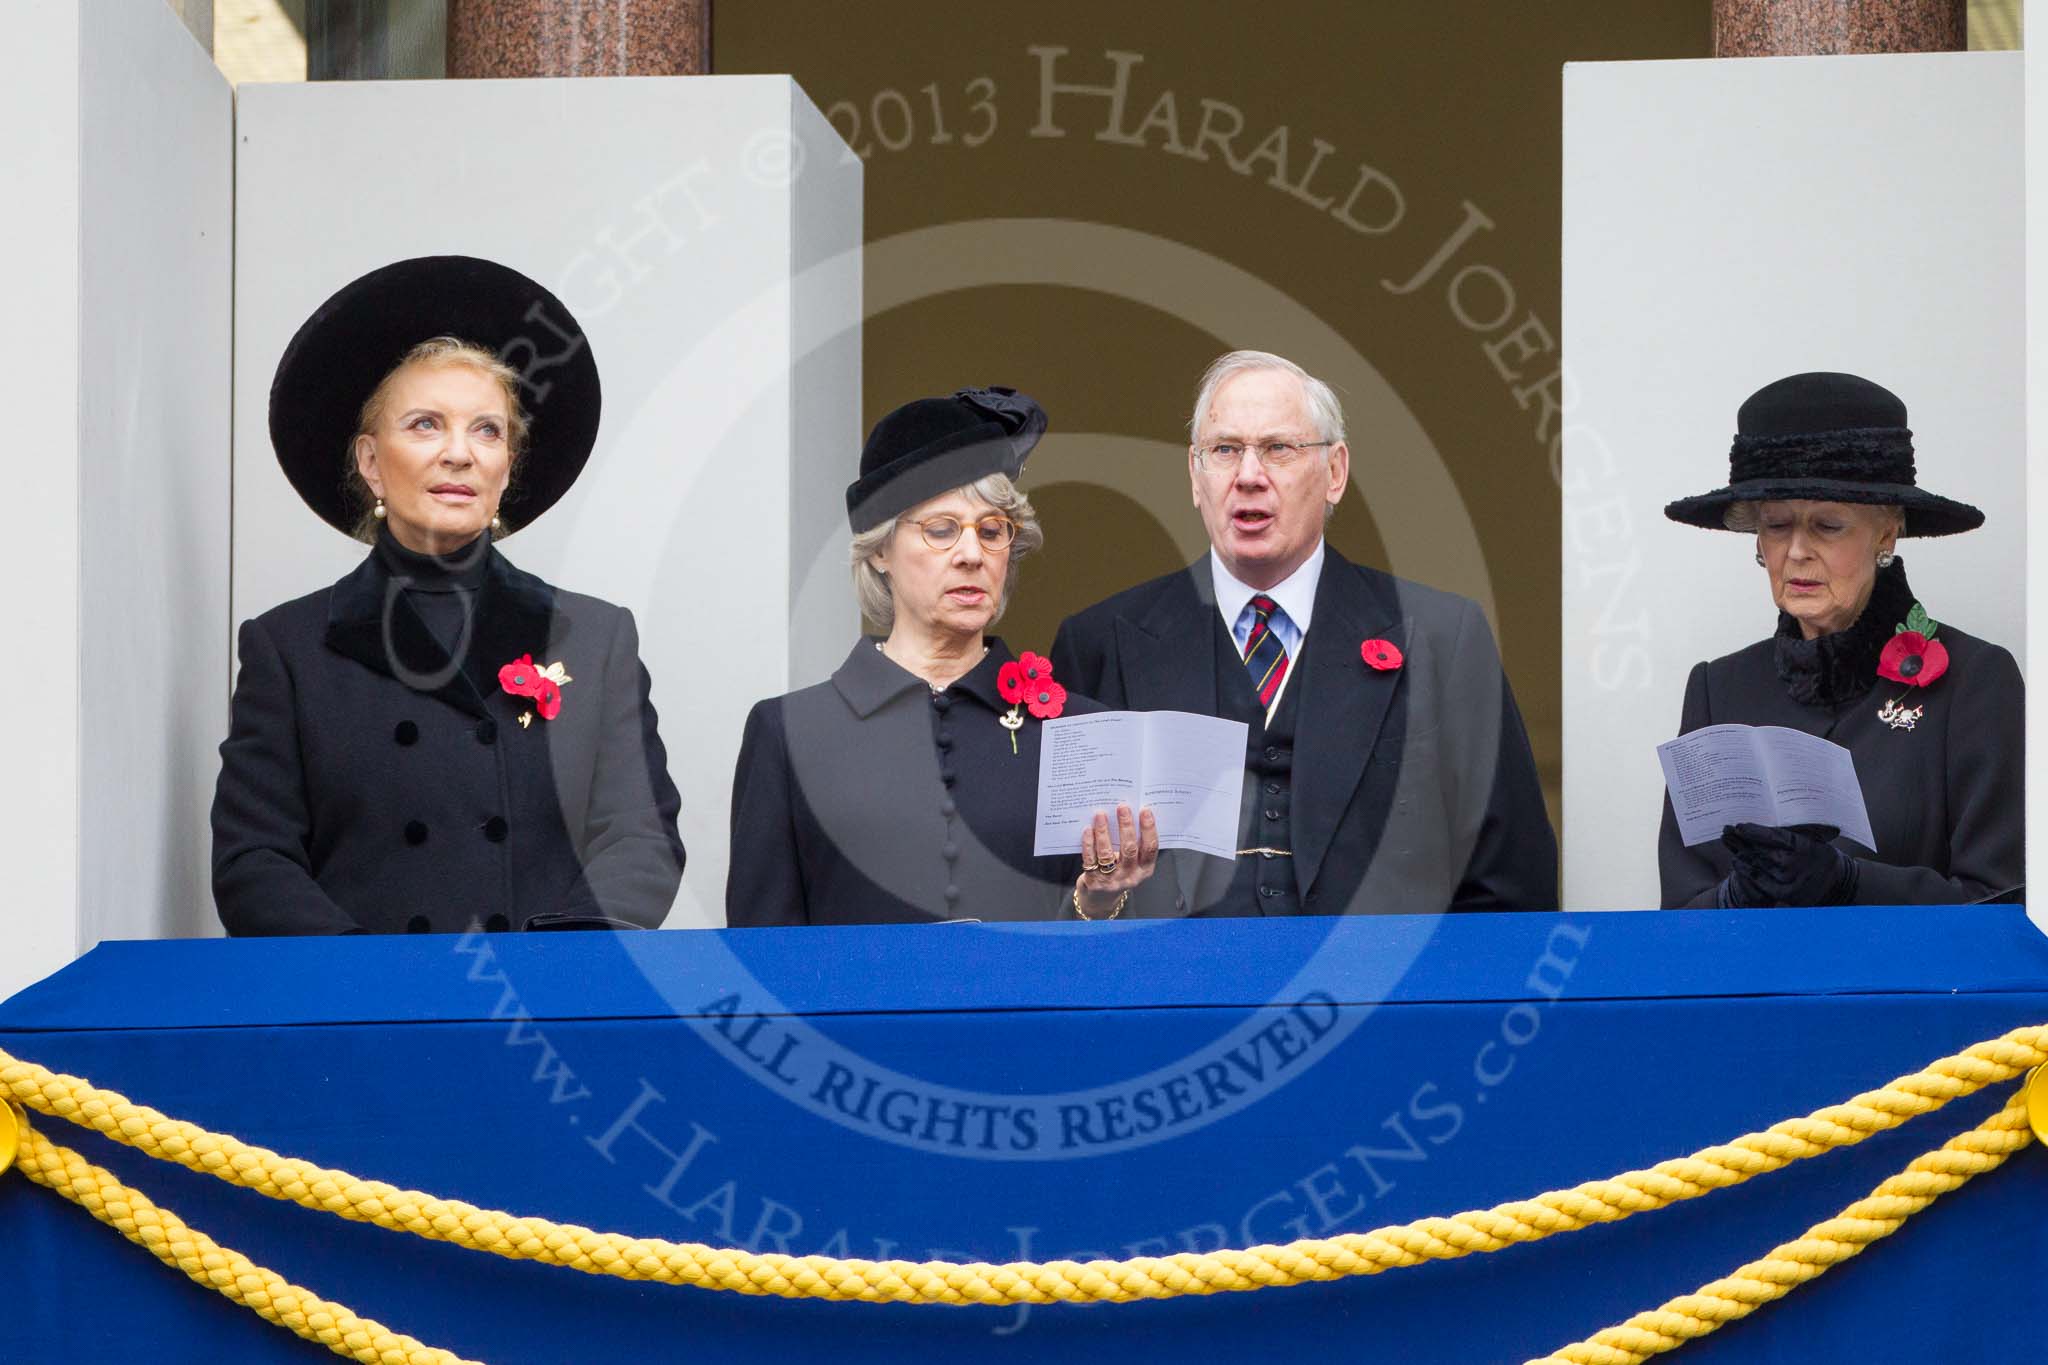 Remembrance Sunday at the Cenotaph 2015: HRH Princess Michael of Kent, THR The Duchess and Duke of Gloucester, and HRH Princess Alexandra, the Hon. Lady Ogilvy,  on the centre balcony of the Foreign- and Commonwealth Office building during the service. Image #293, 08 November 2015 11:15 Whitehall, London, UK